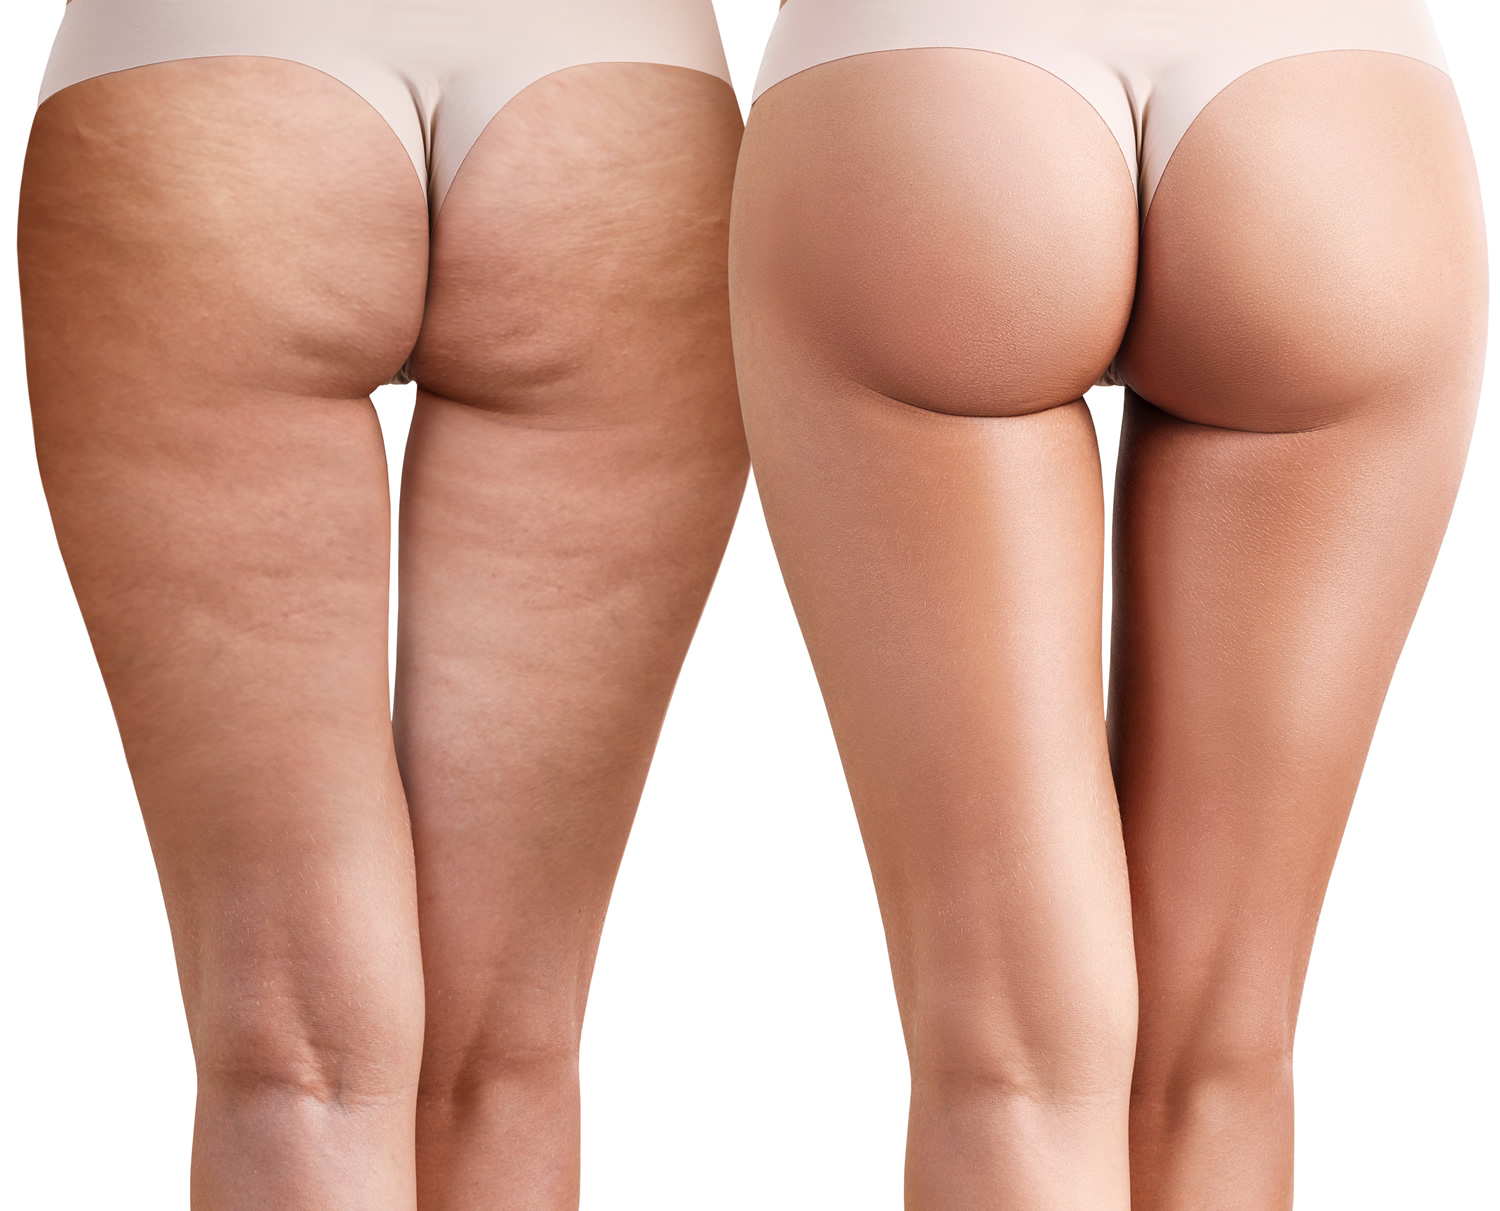 How to get rid of cellulite: Top 3 cellulite treatments that actually work!  - Clinique des Champs Elysees